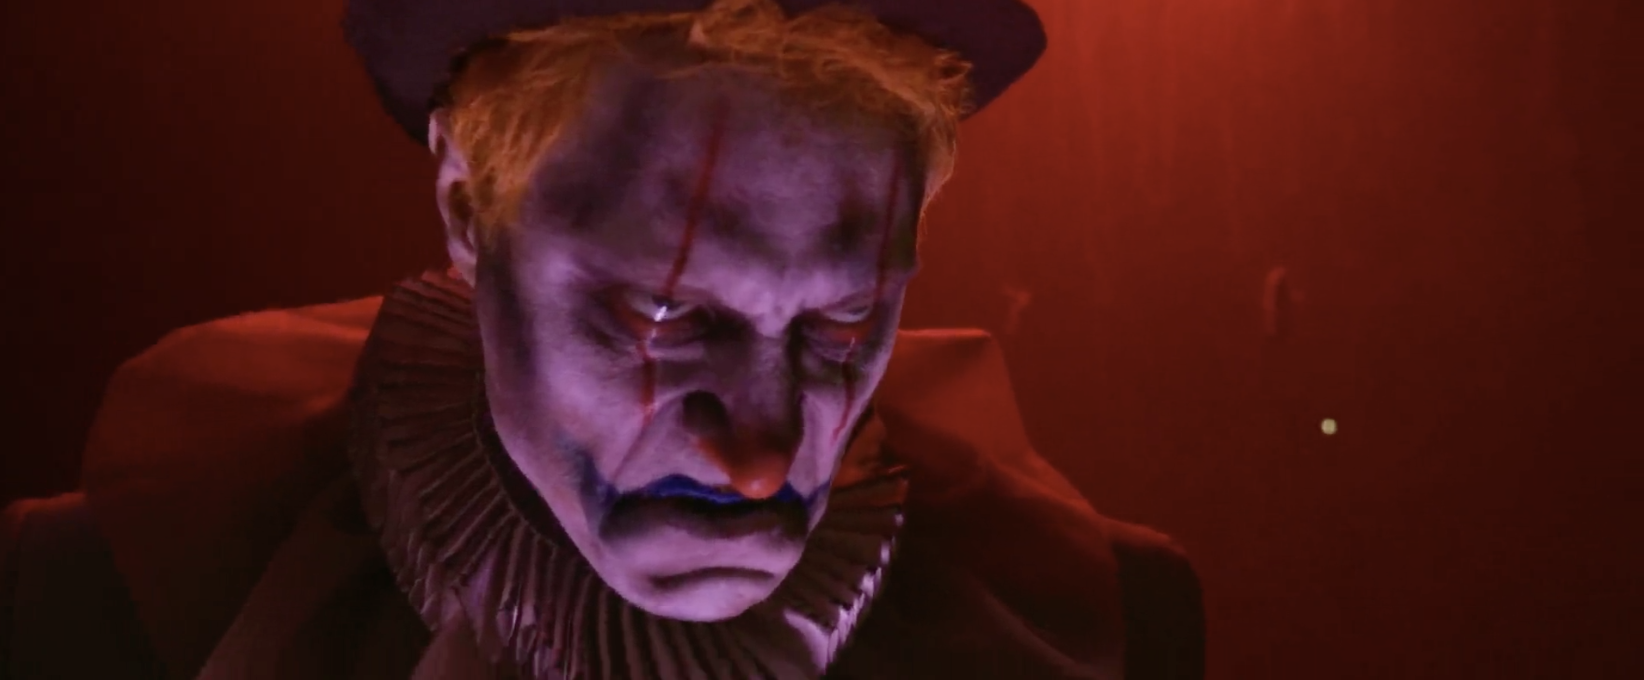 CLOWN (2019) Reviews and now free to watch online - MOVIES and MANIA